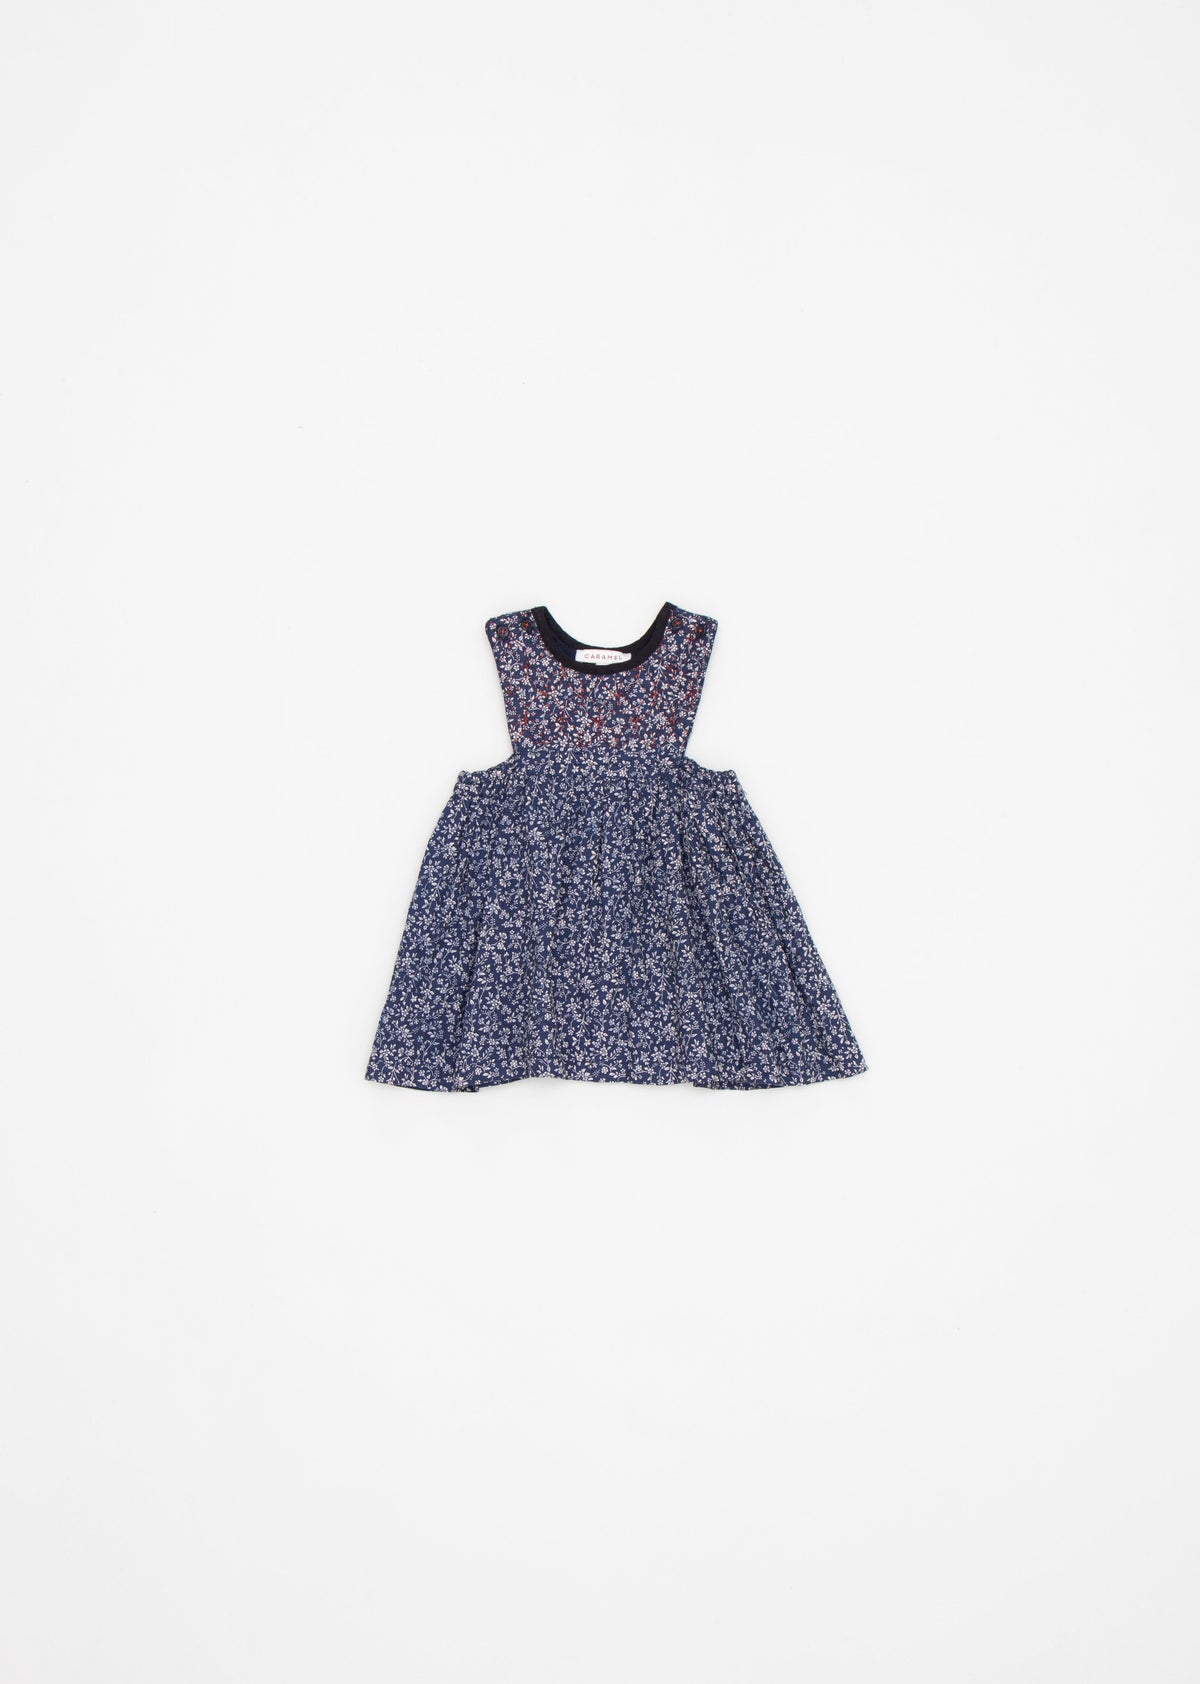 COLIMA BABY DRESS - NAVY FLORAL 1